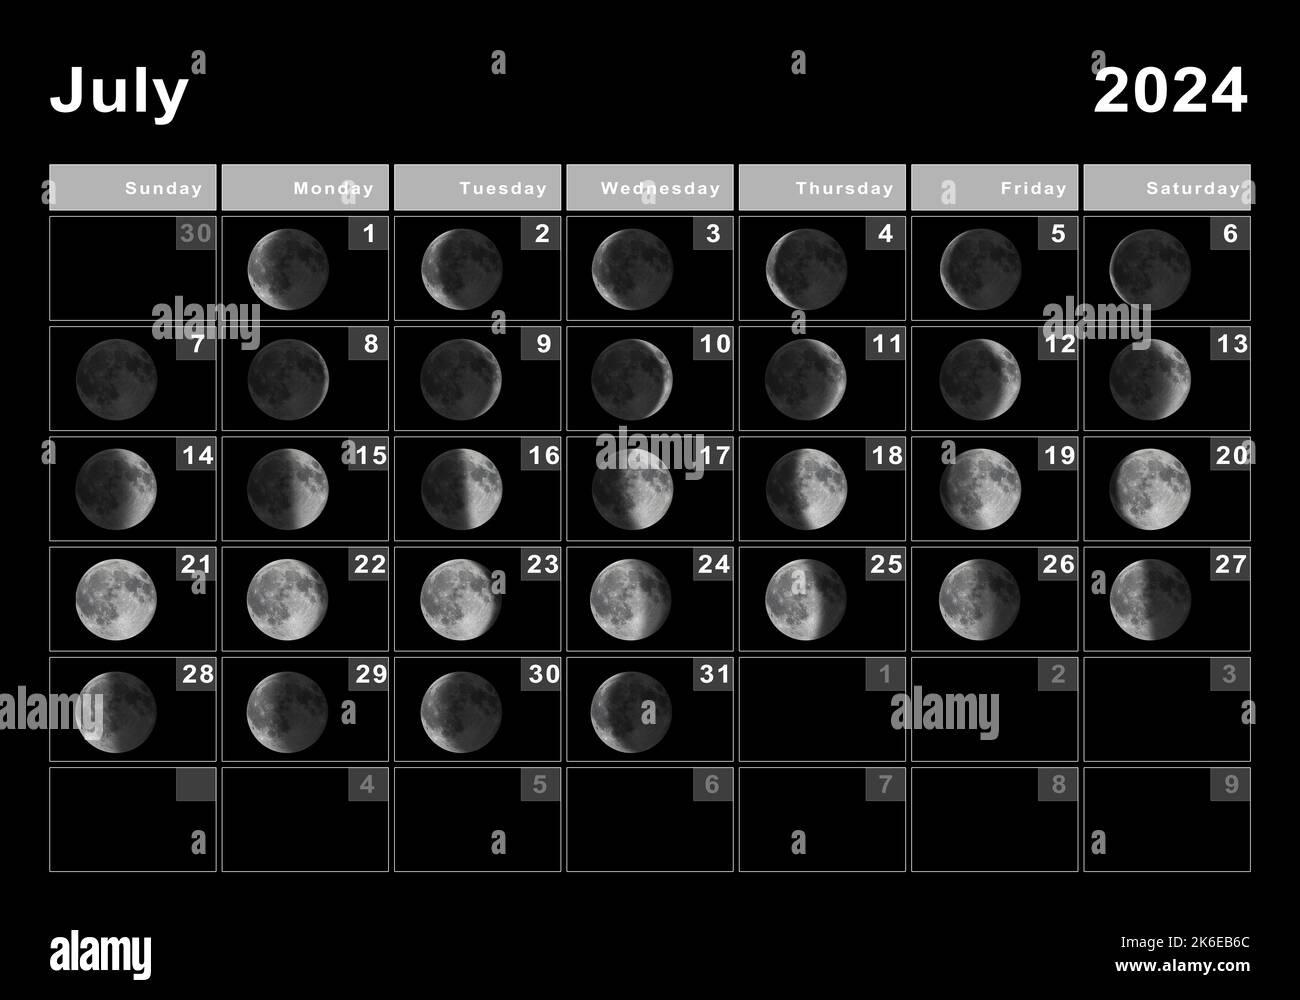 July 2024 Lunar Calendar, Moon Cycles, Moon Phases Stock Photo - Alamy with regard to July 14th Lunar Calendar 2024